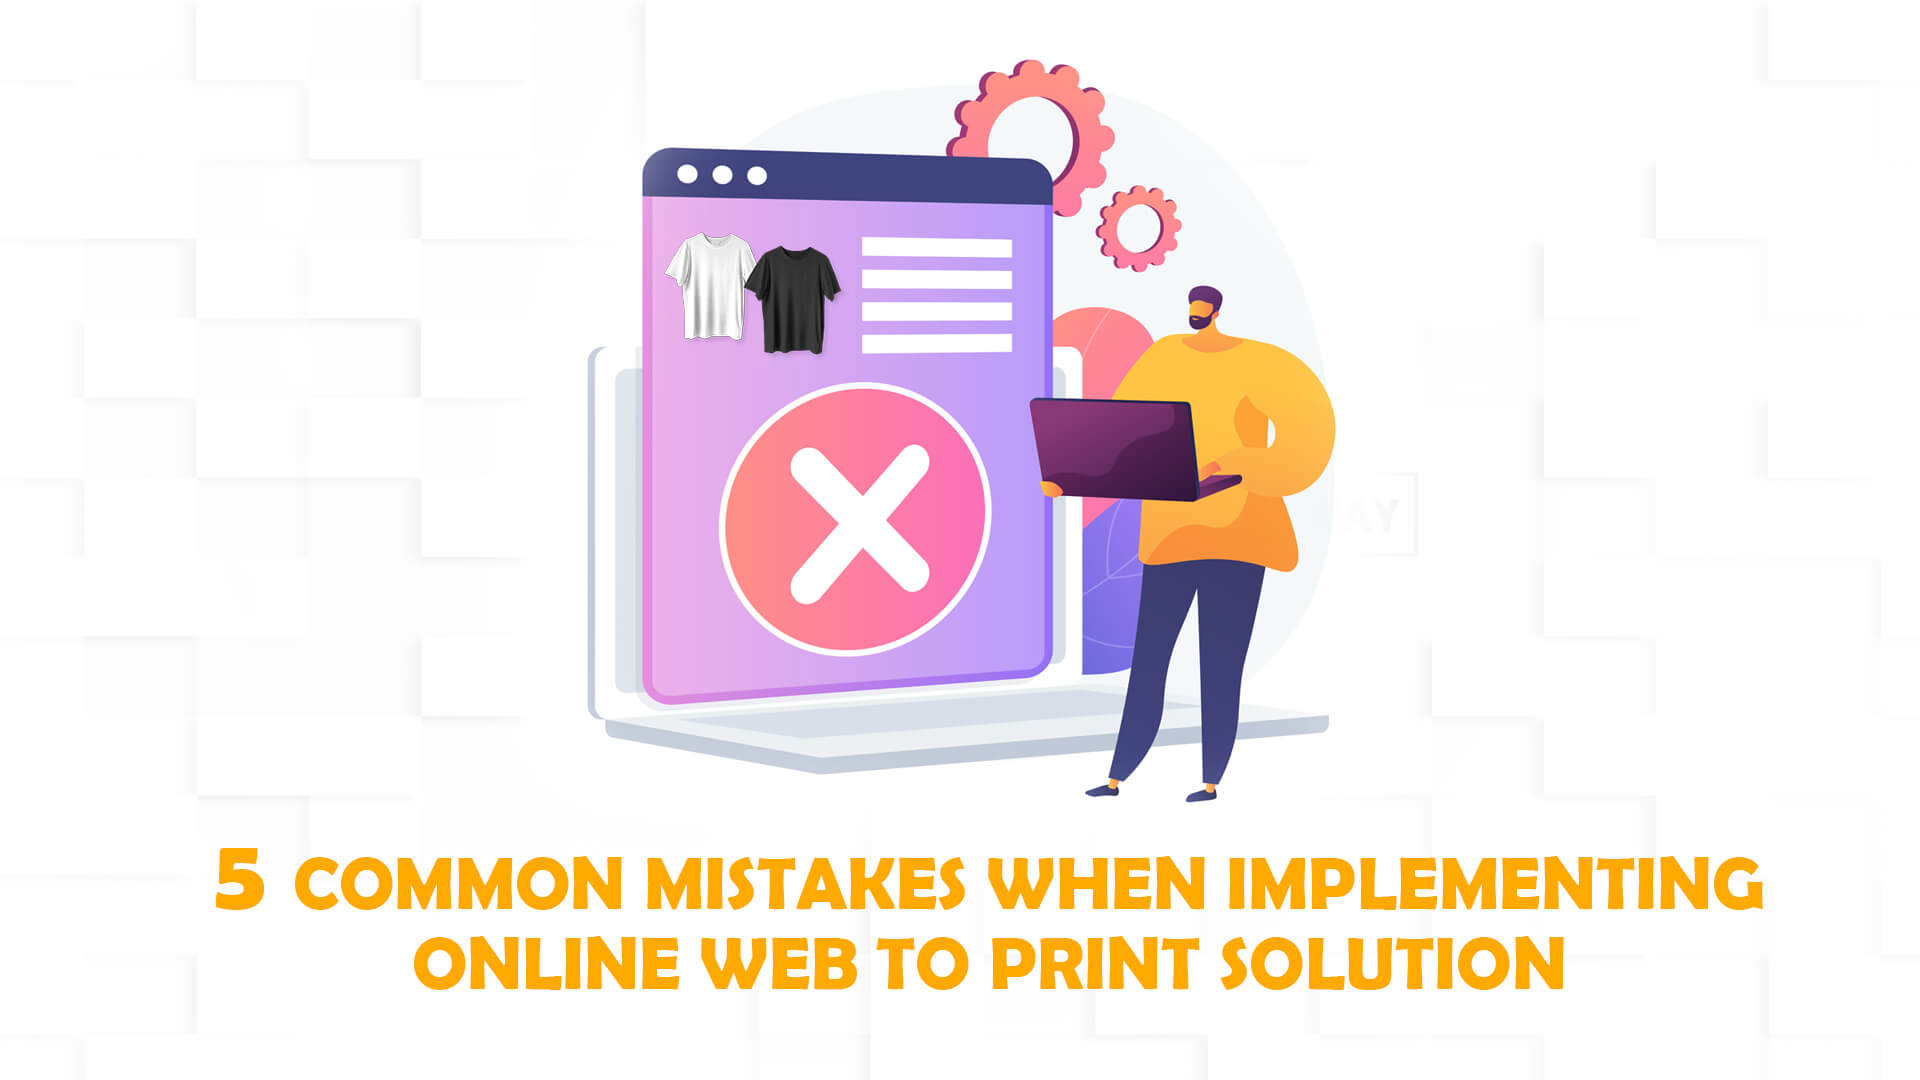 5 Common Mistakes When Implementing Online Web to Print Solution